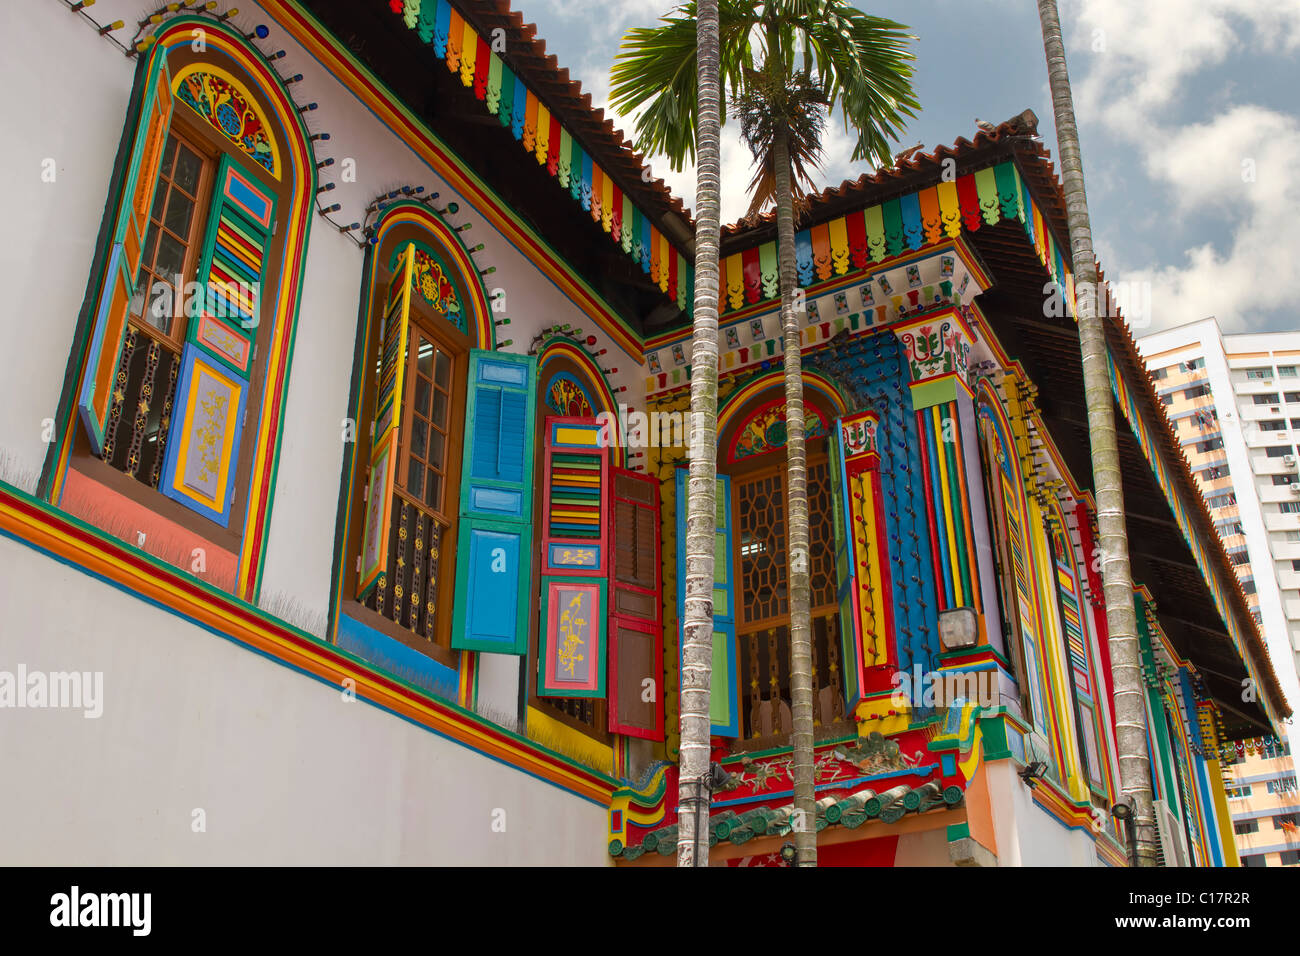 Historic Colorful Peranakan Terrace House in Singapore 2 Stock Photo